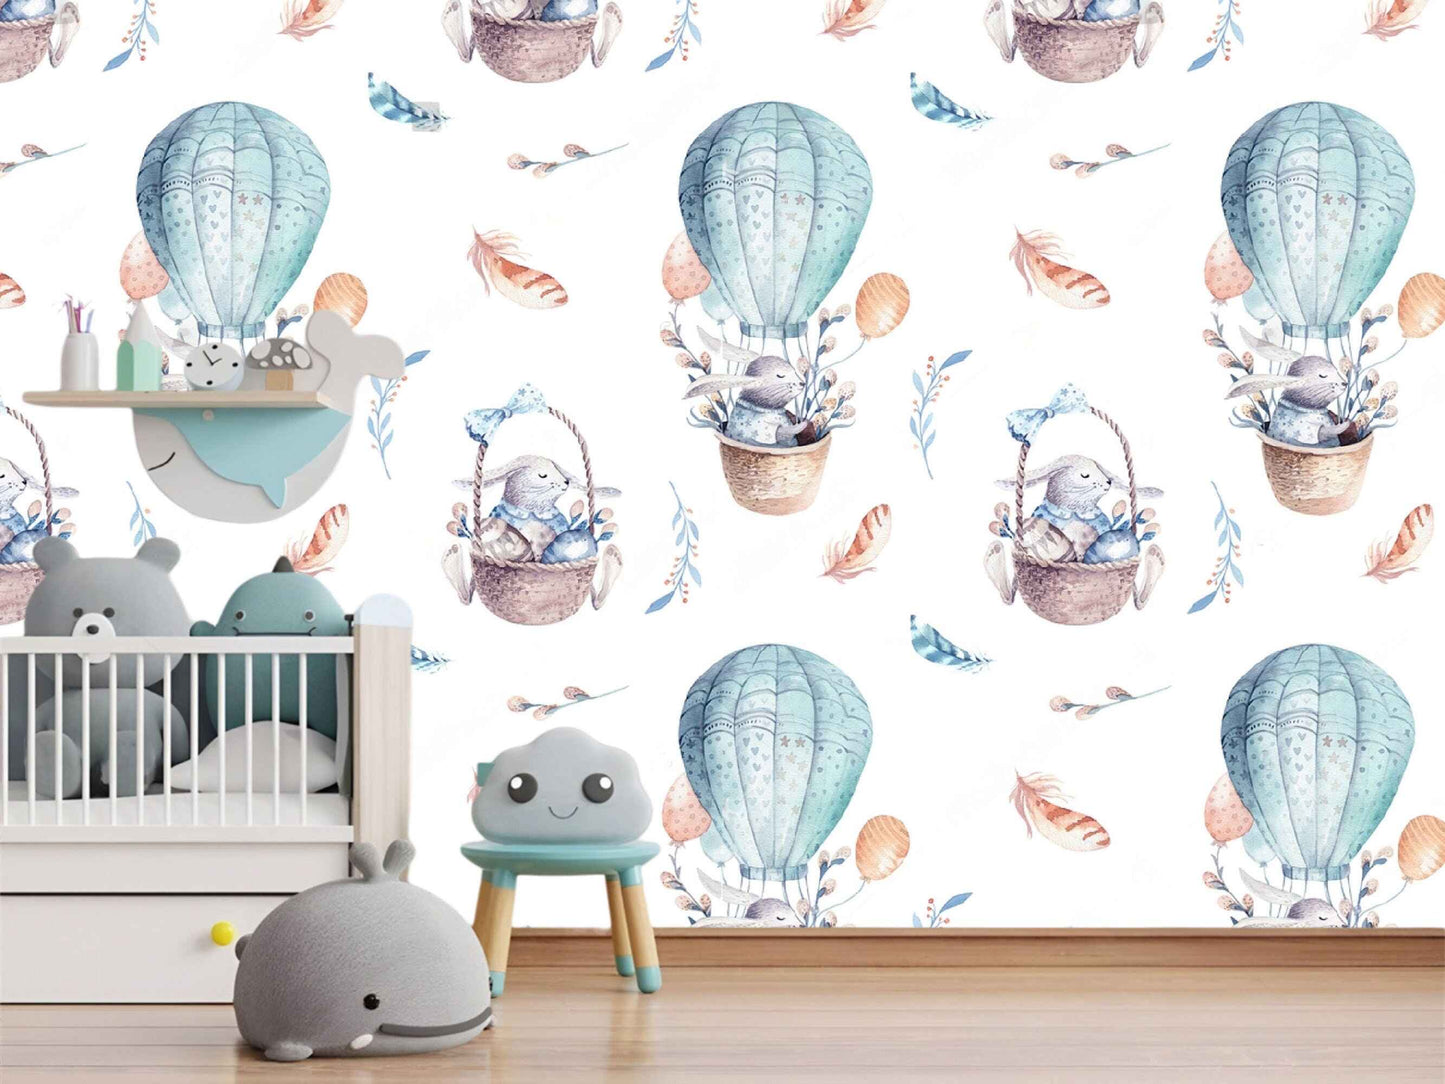 Playful rabbit in a balloon wall art in a kids' room, inspiring imagination and creativity.